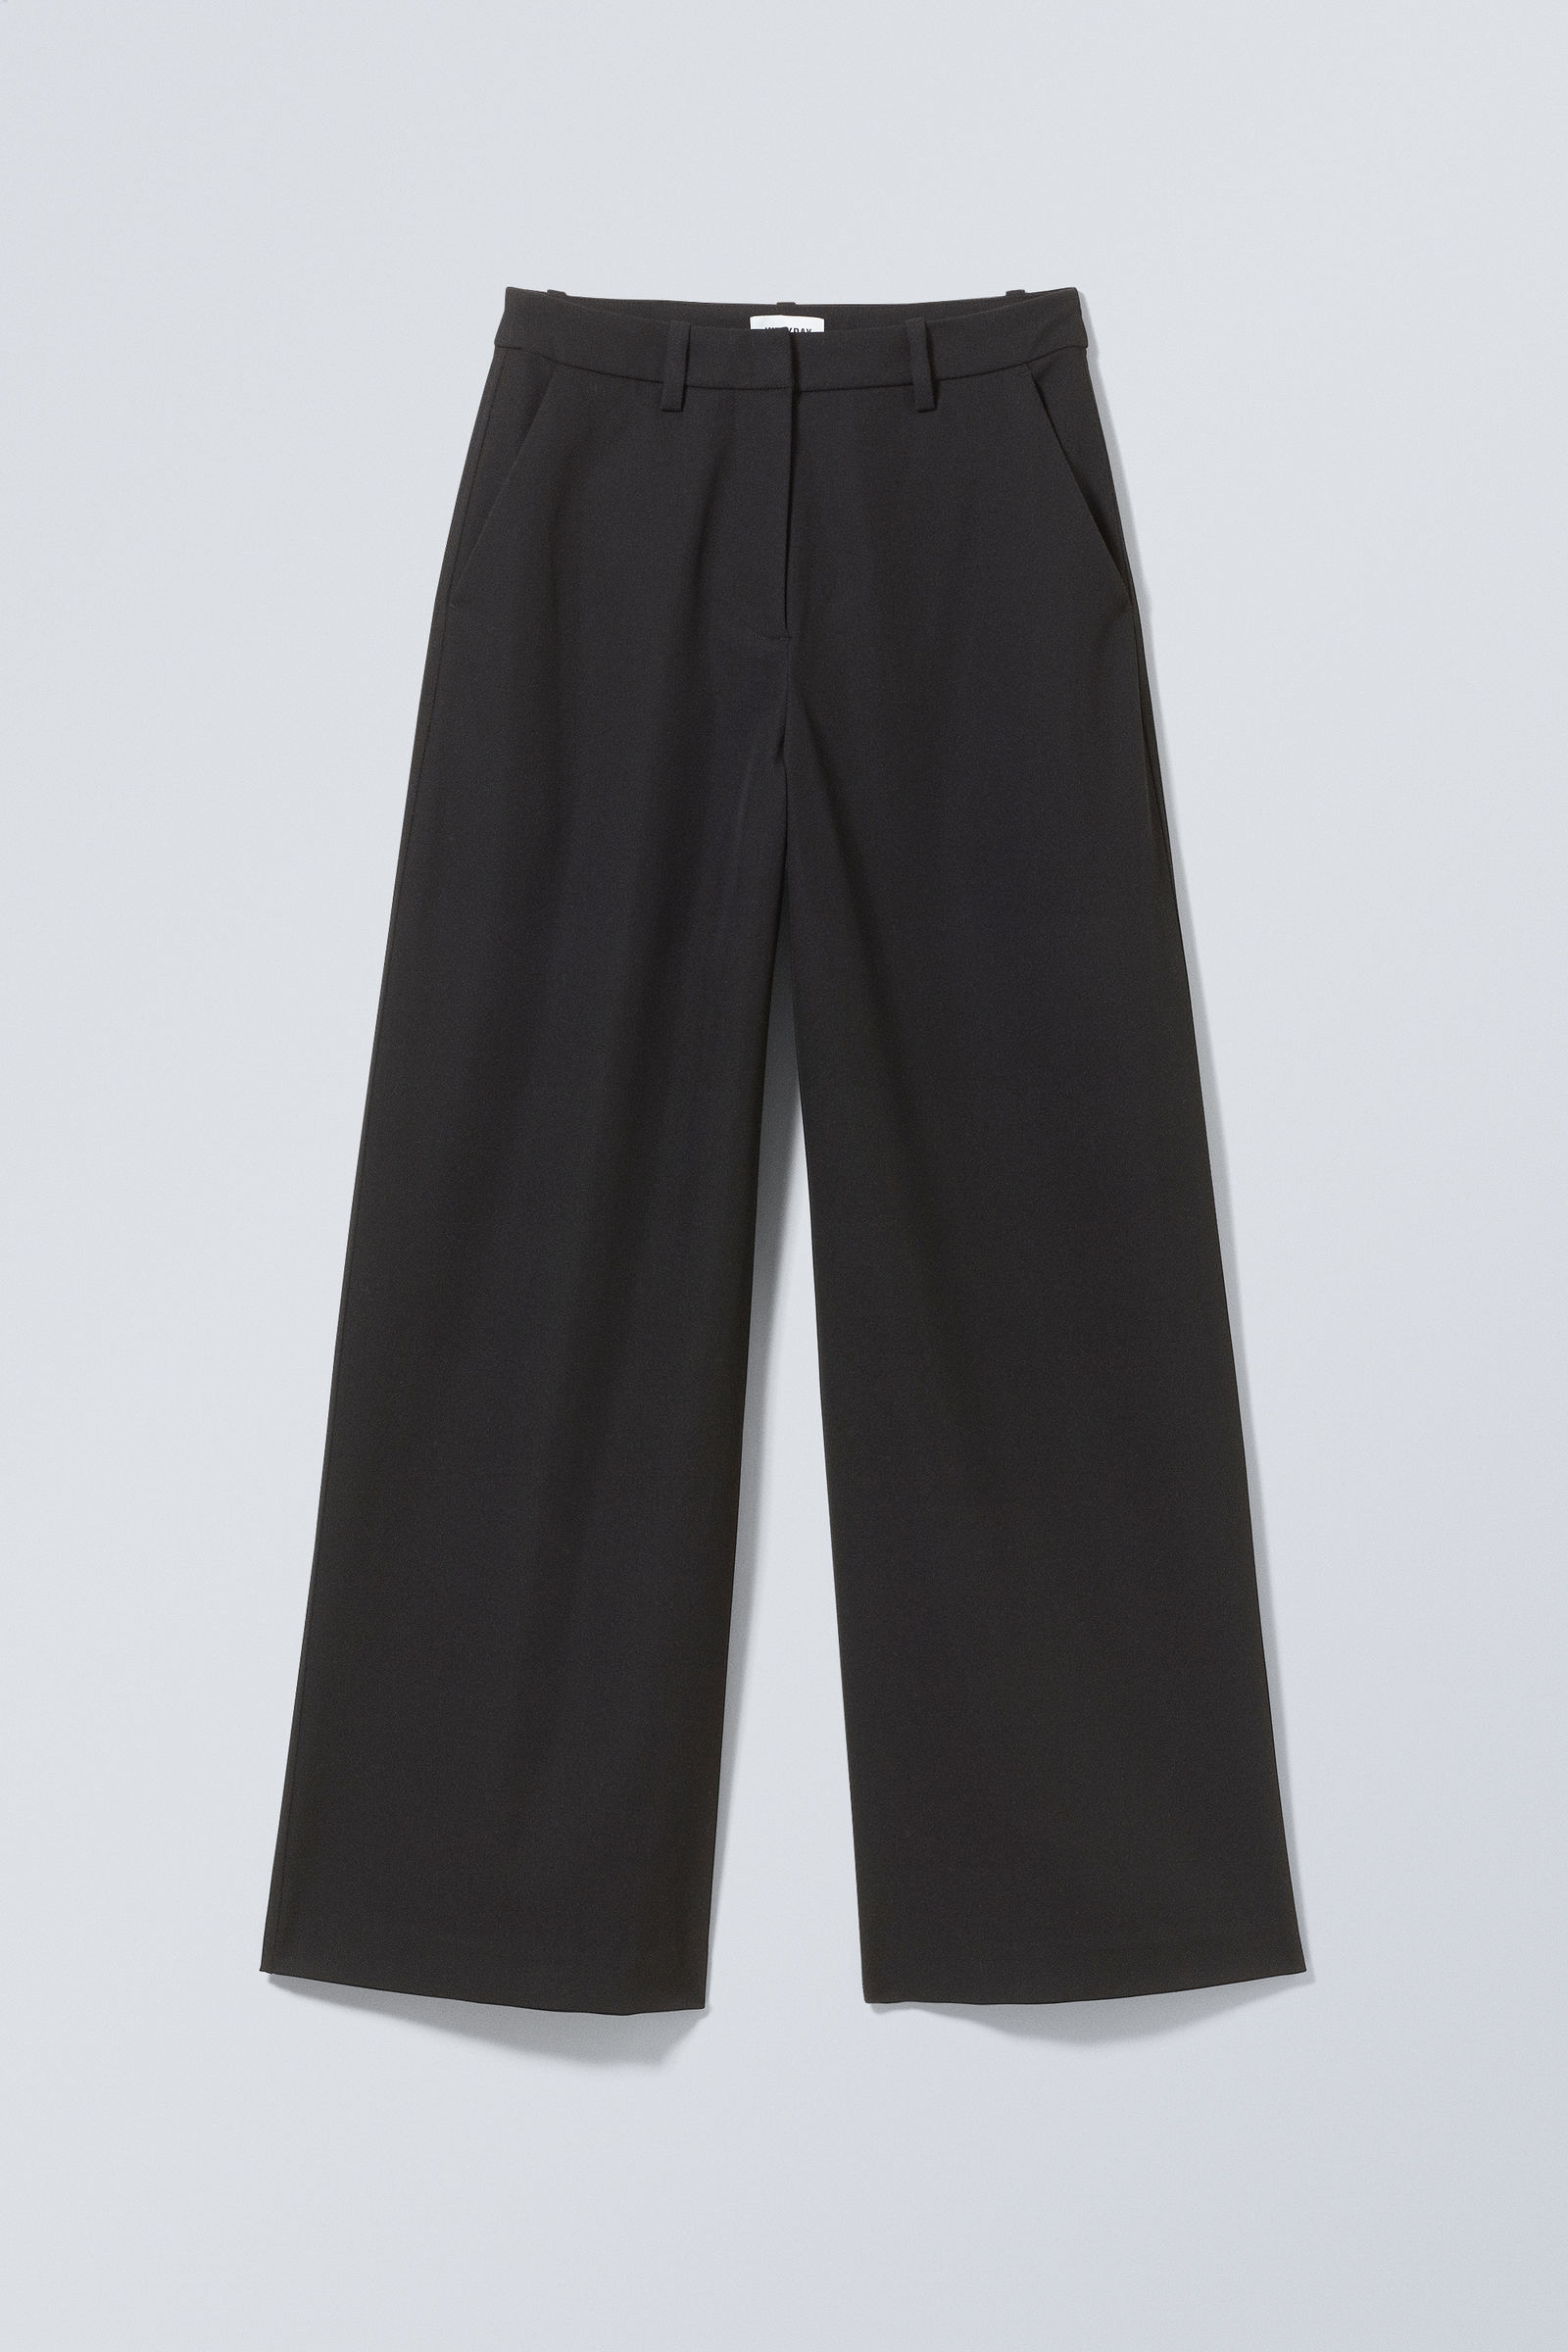 #272628 - Tate Suiting Trousers - 1